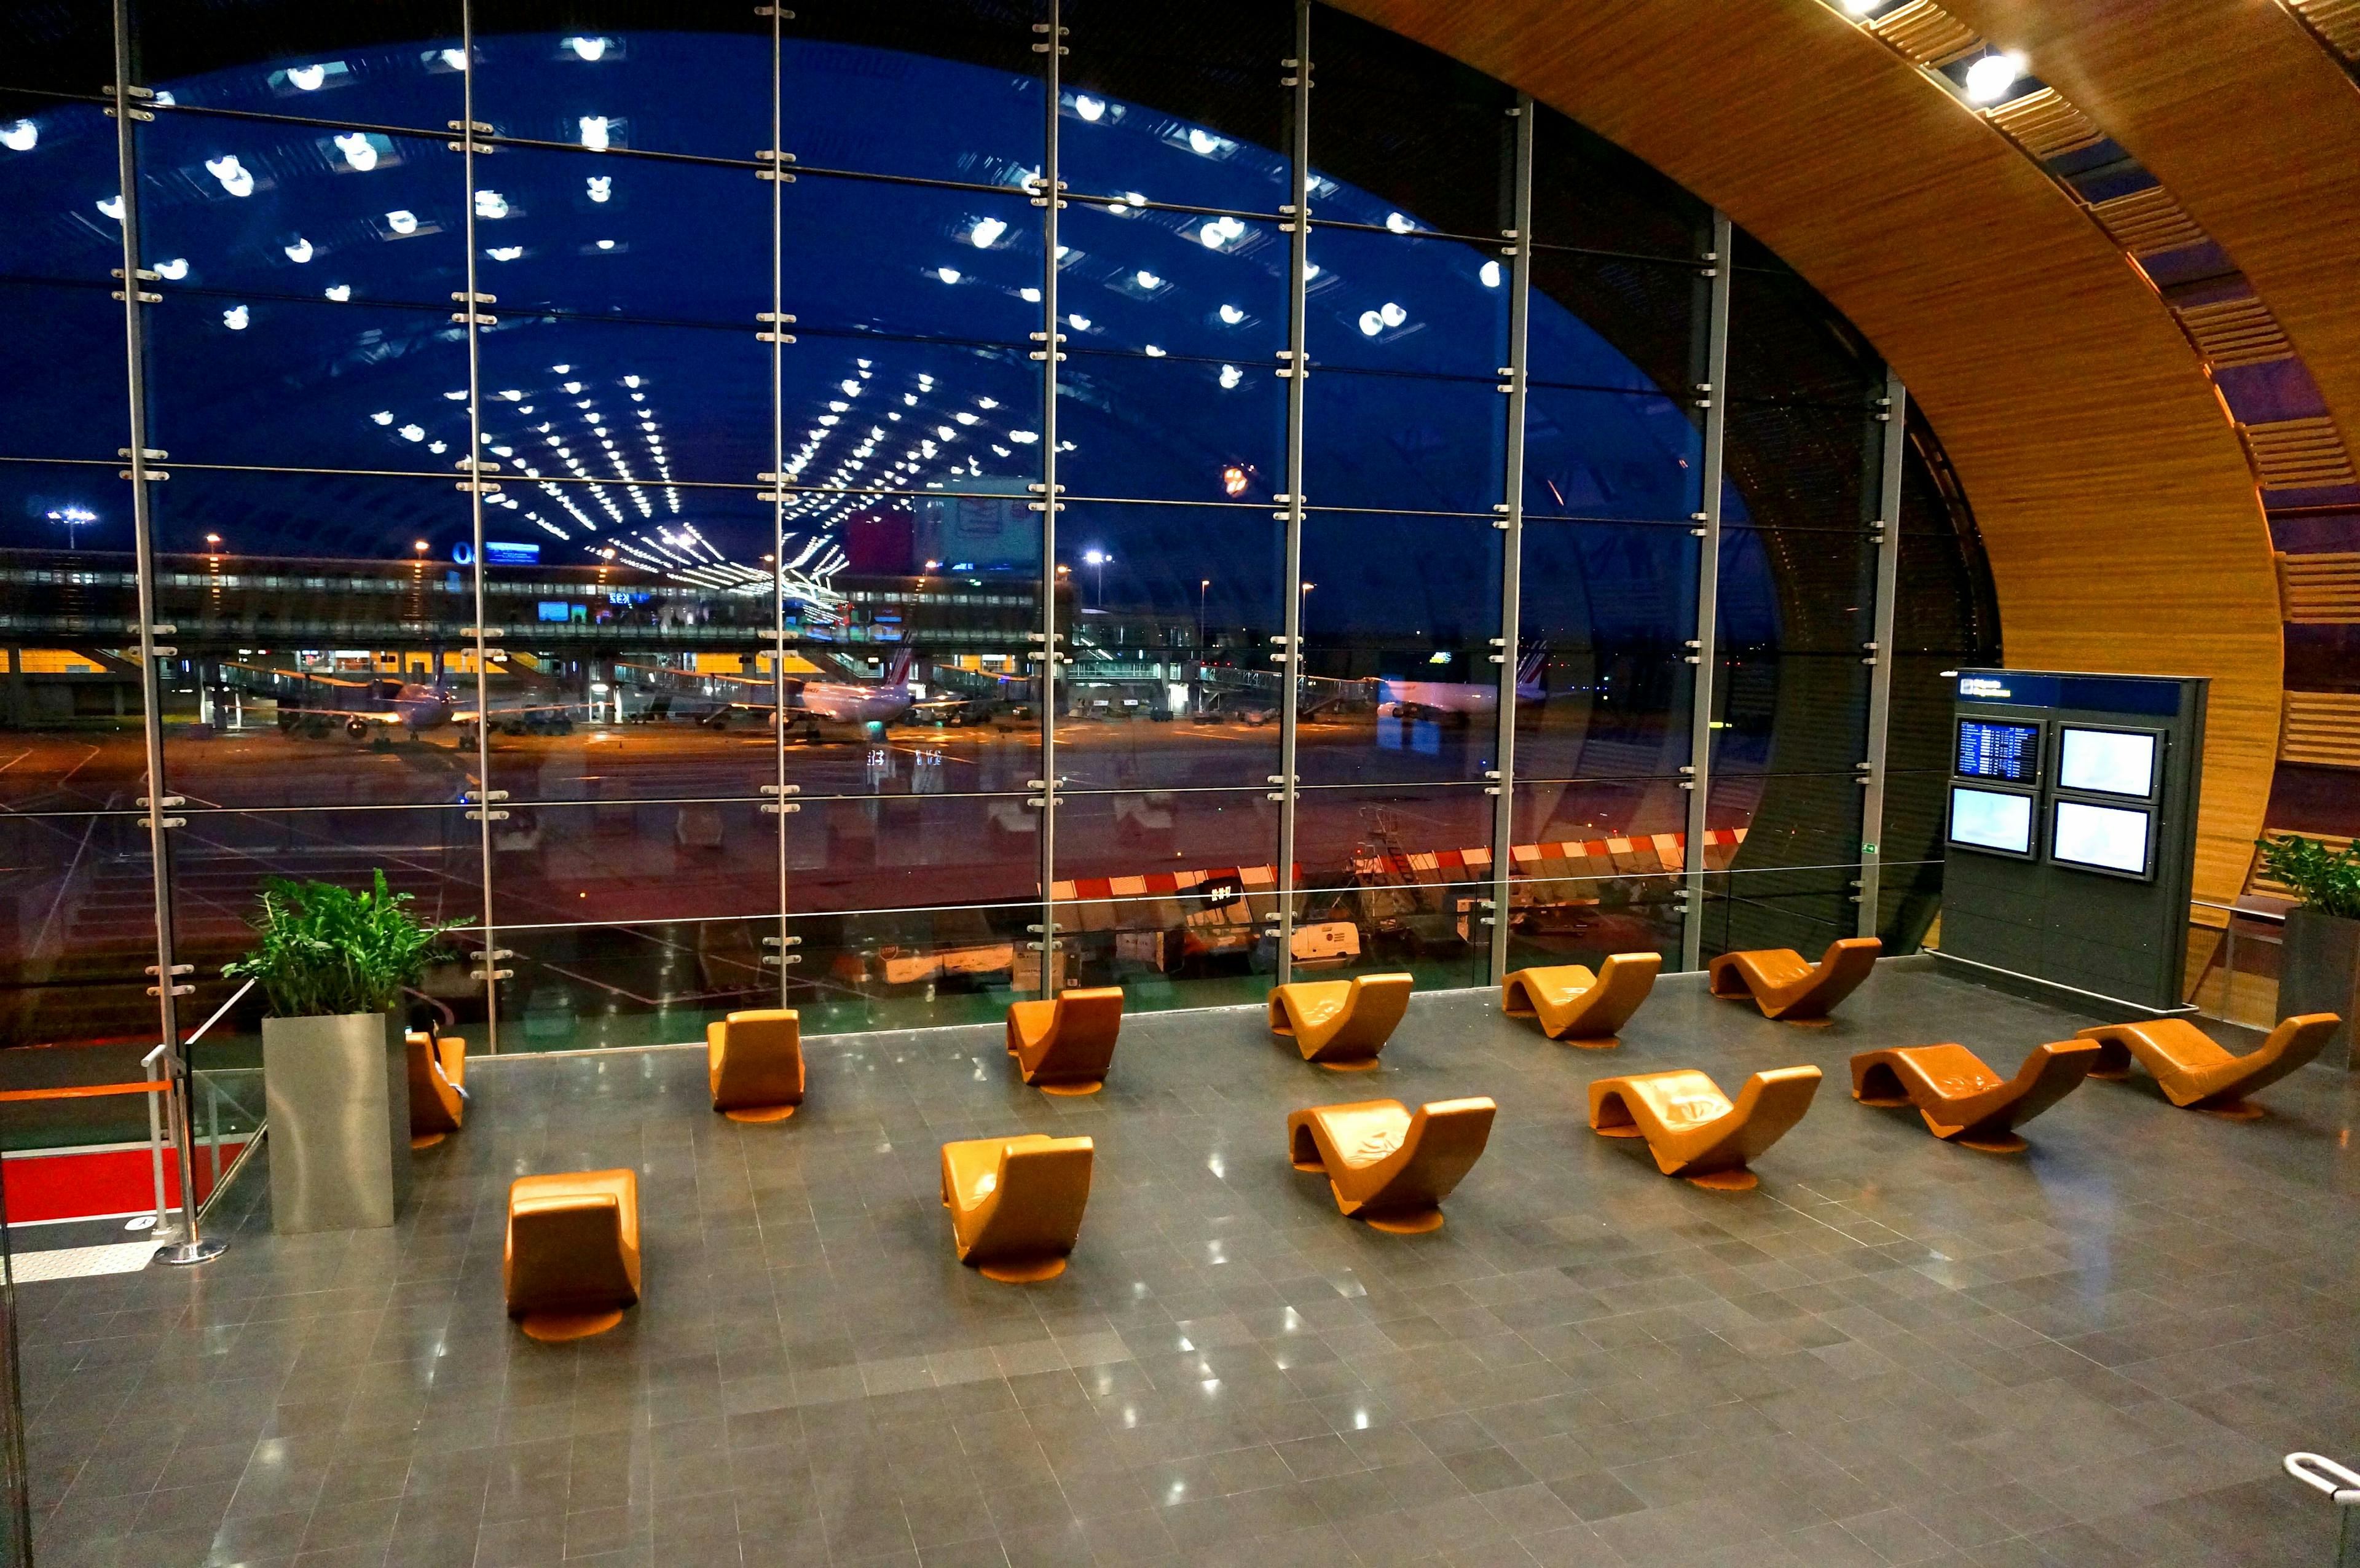 The best airports in the world - Paris Charles de Gaulle Airport - RatePunk